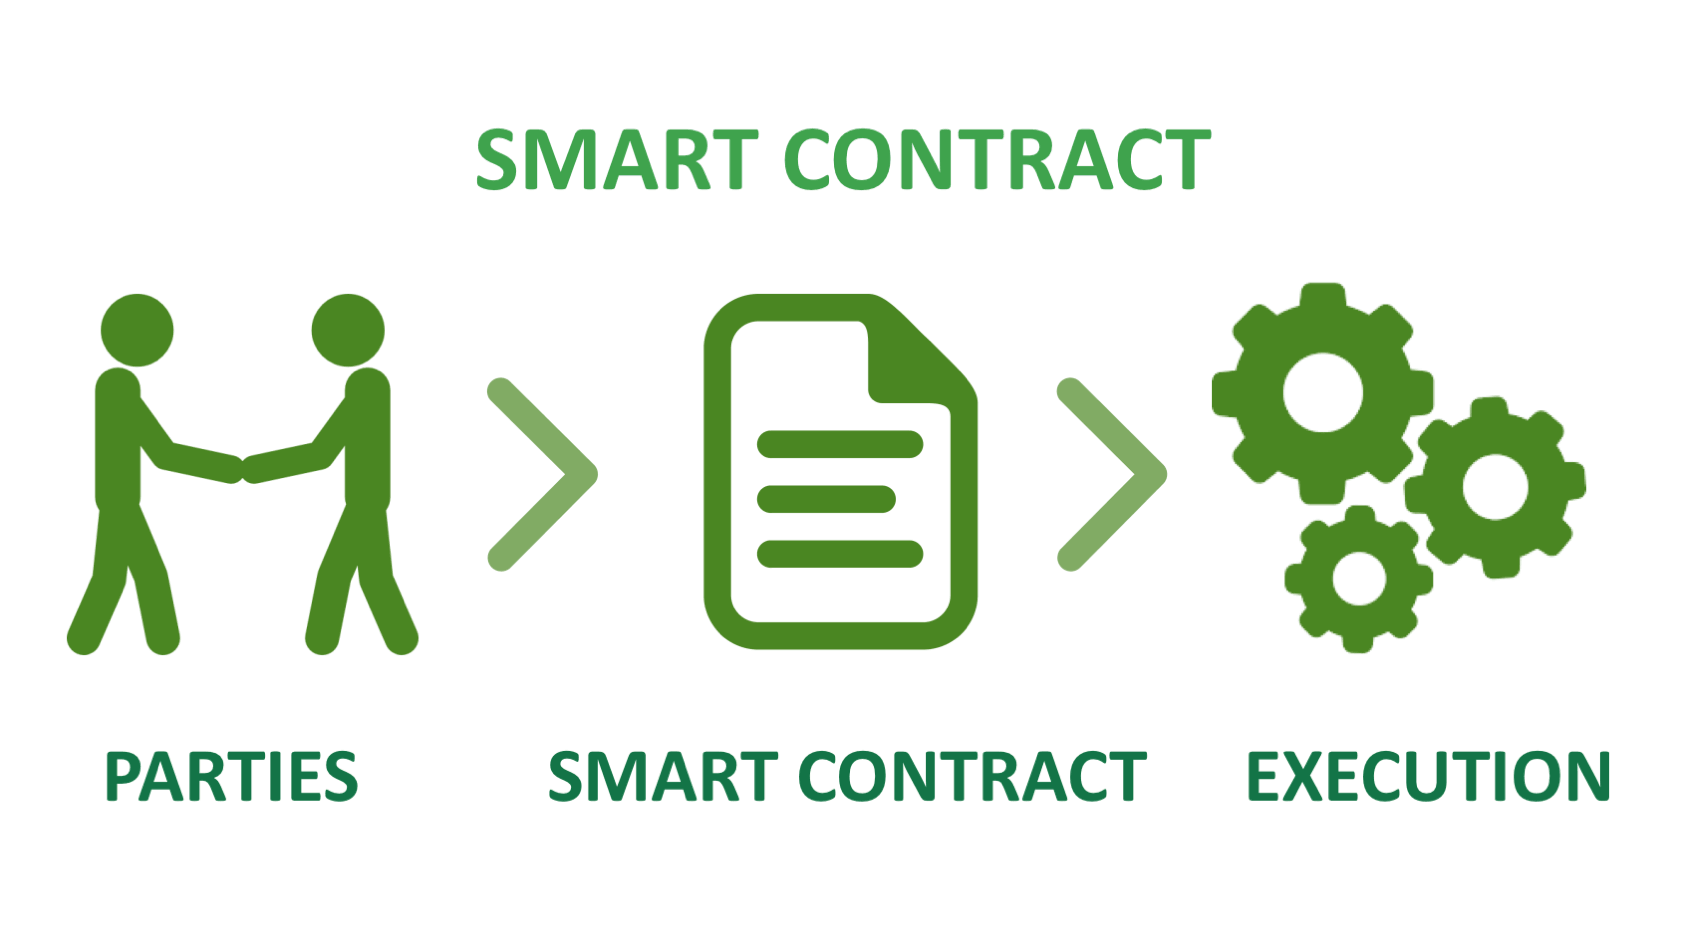 smart-contracts-in-blockhain-in-comparison-to-the-ordinary-contracts-image-2.png